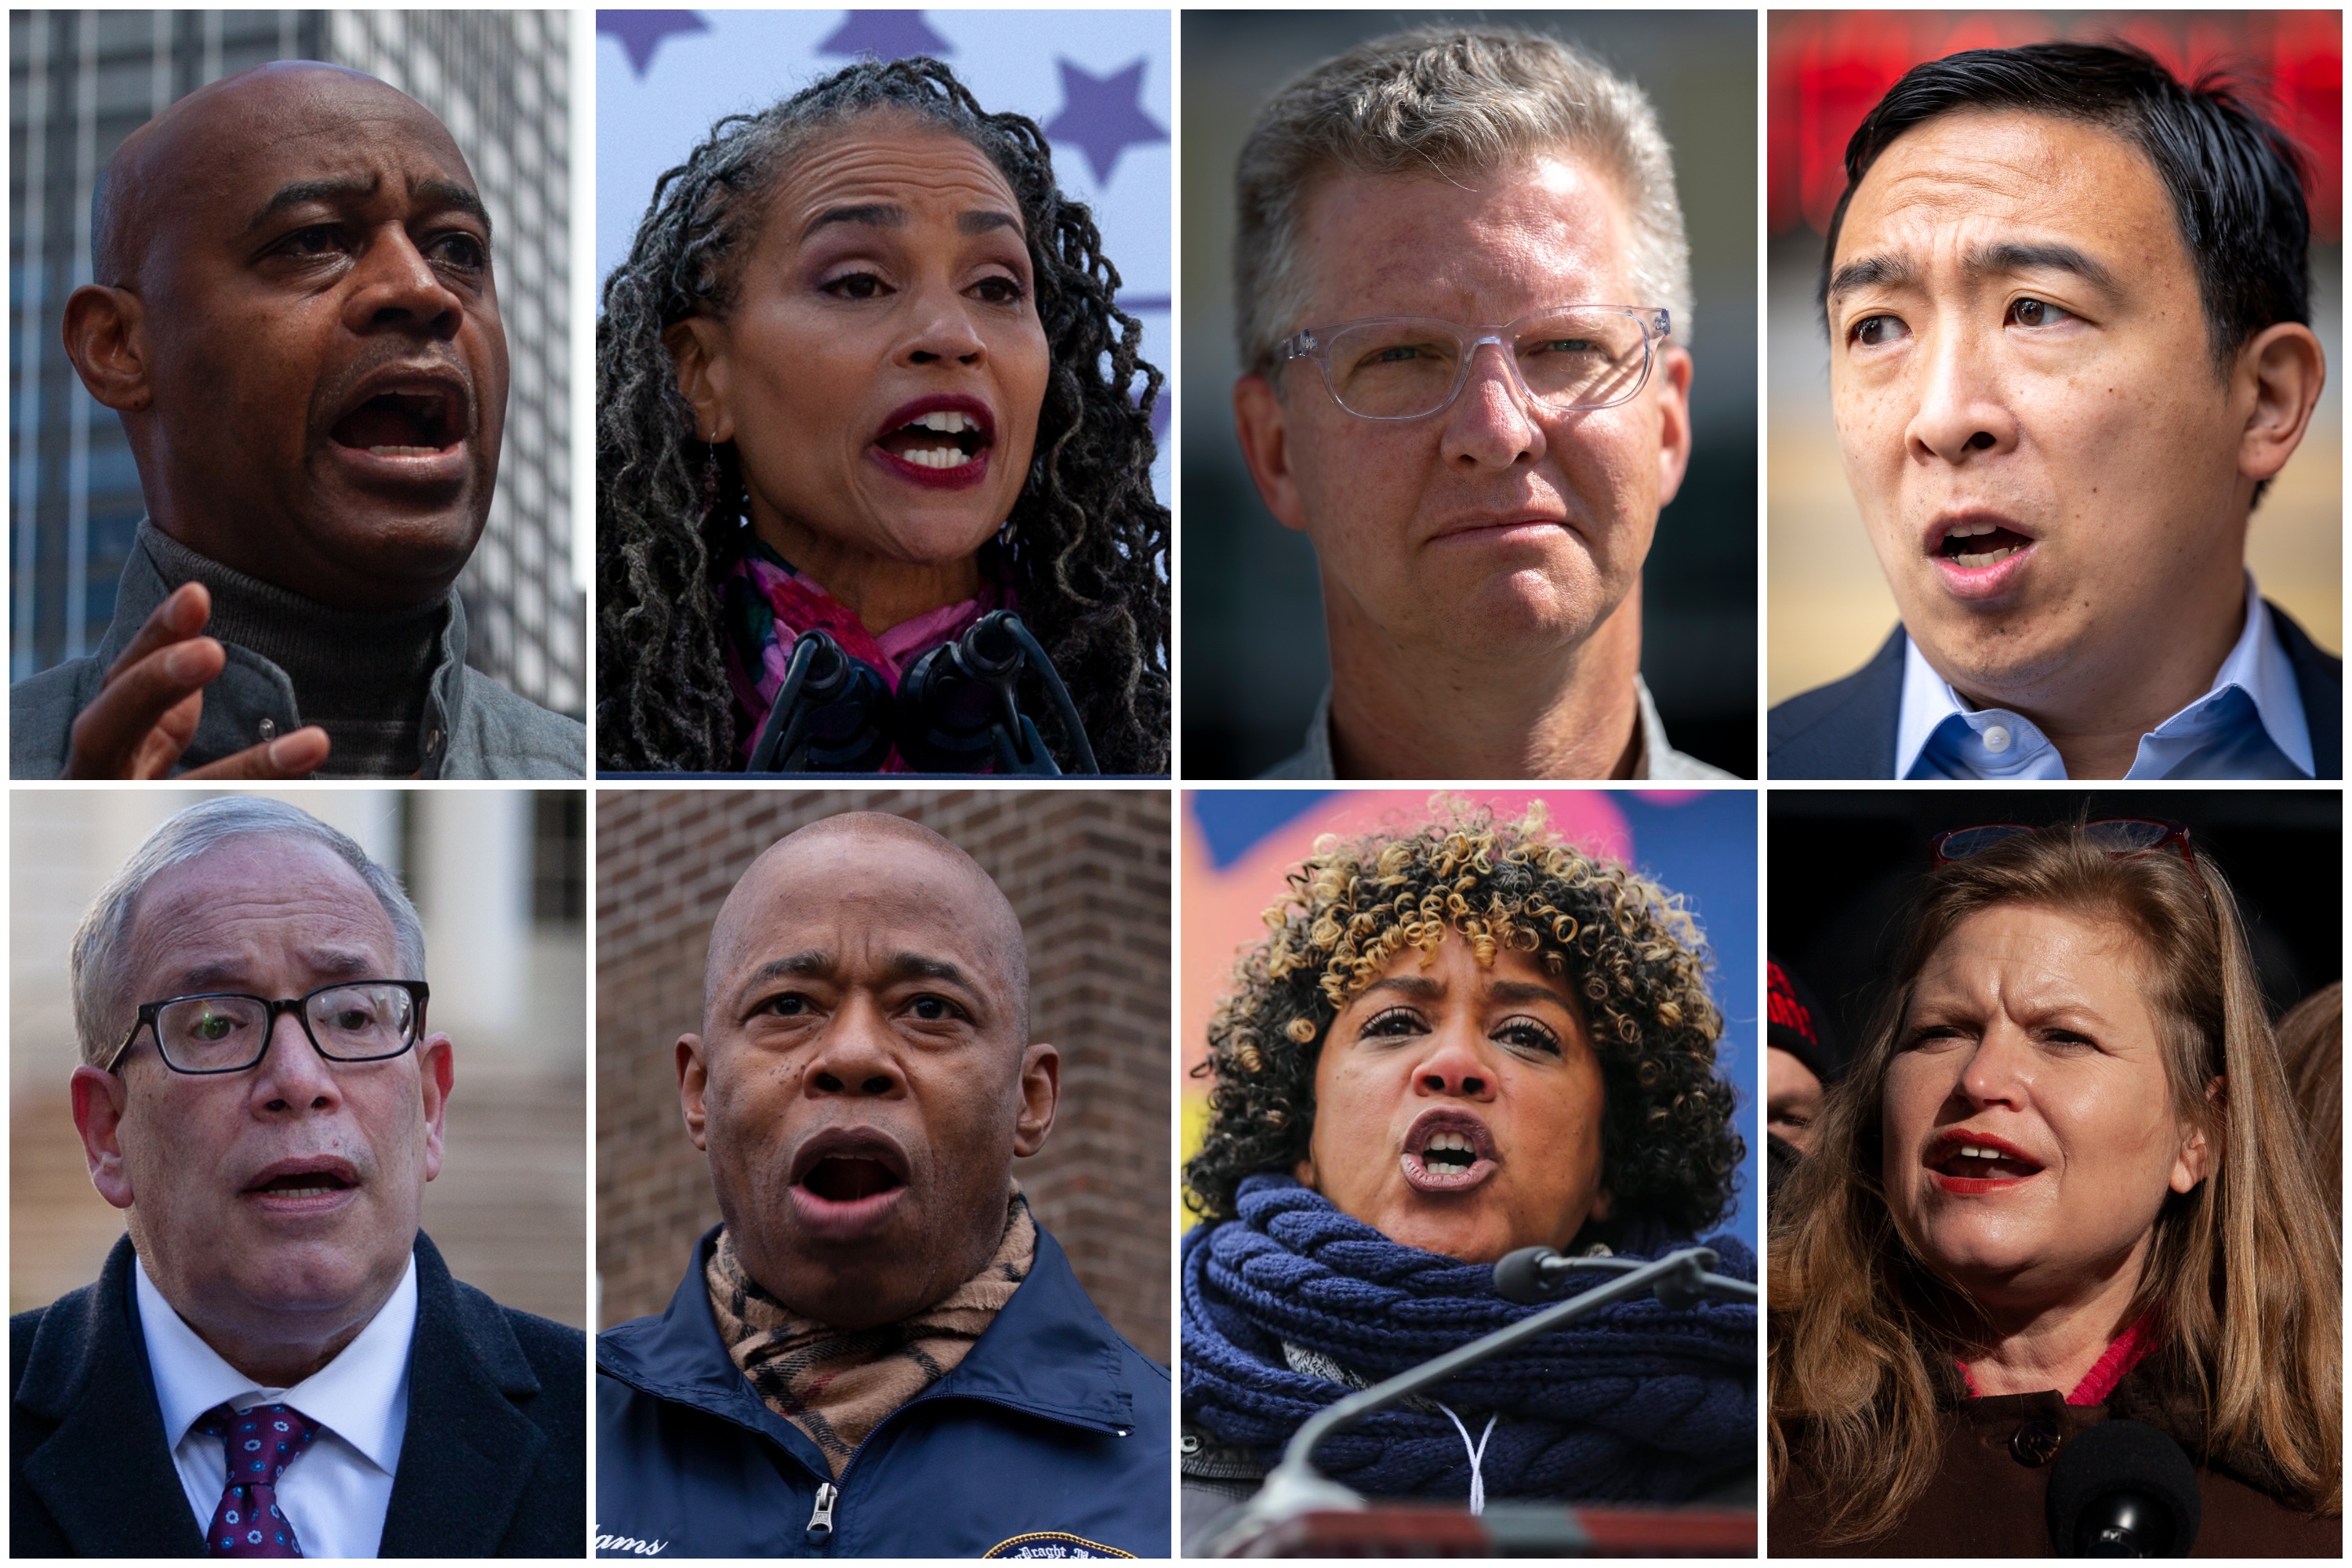 Mayoral candidates, clockwise from top left: Ray McGuire, Maya Wiley, Shaun Donovan, Andrew Yang, Kathryn Garcia, Dianne Morales, Eric Adams and Scott Stringer.